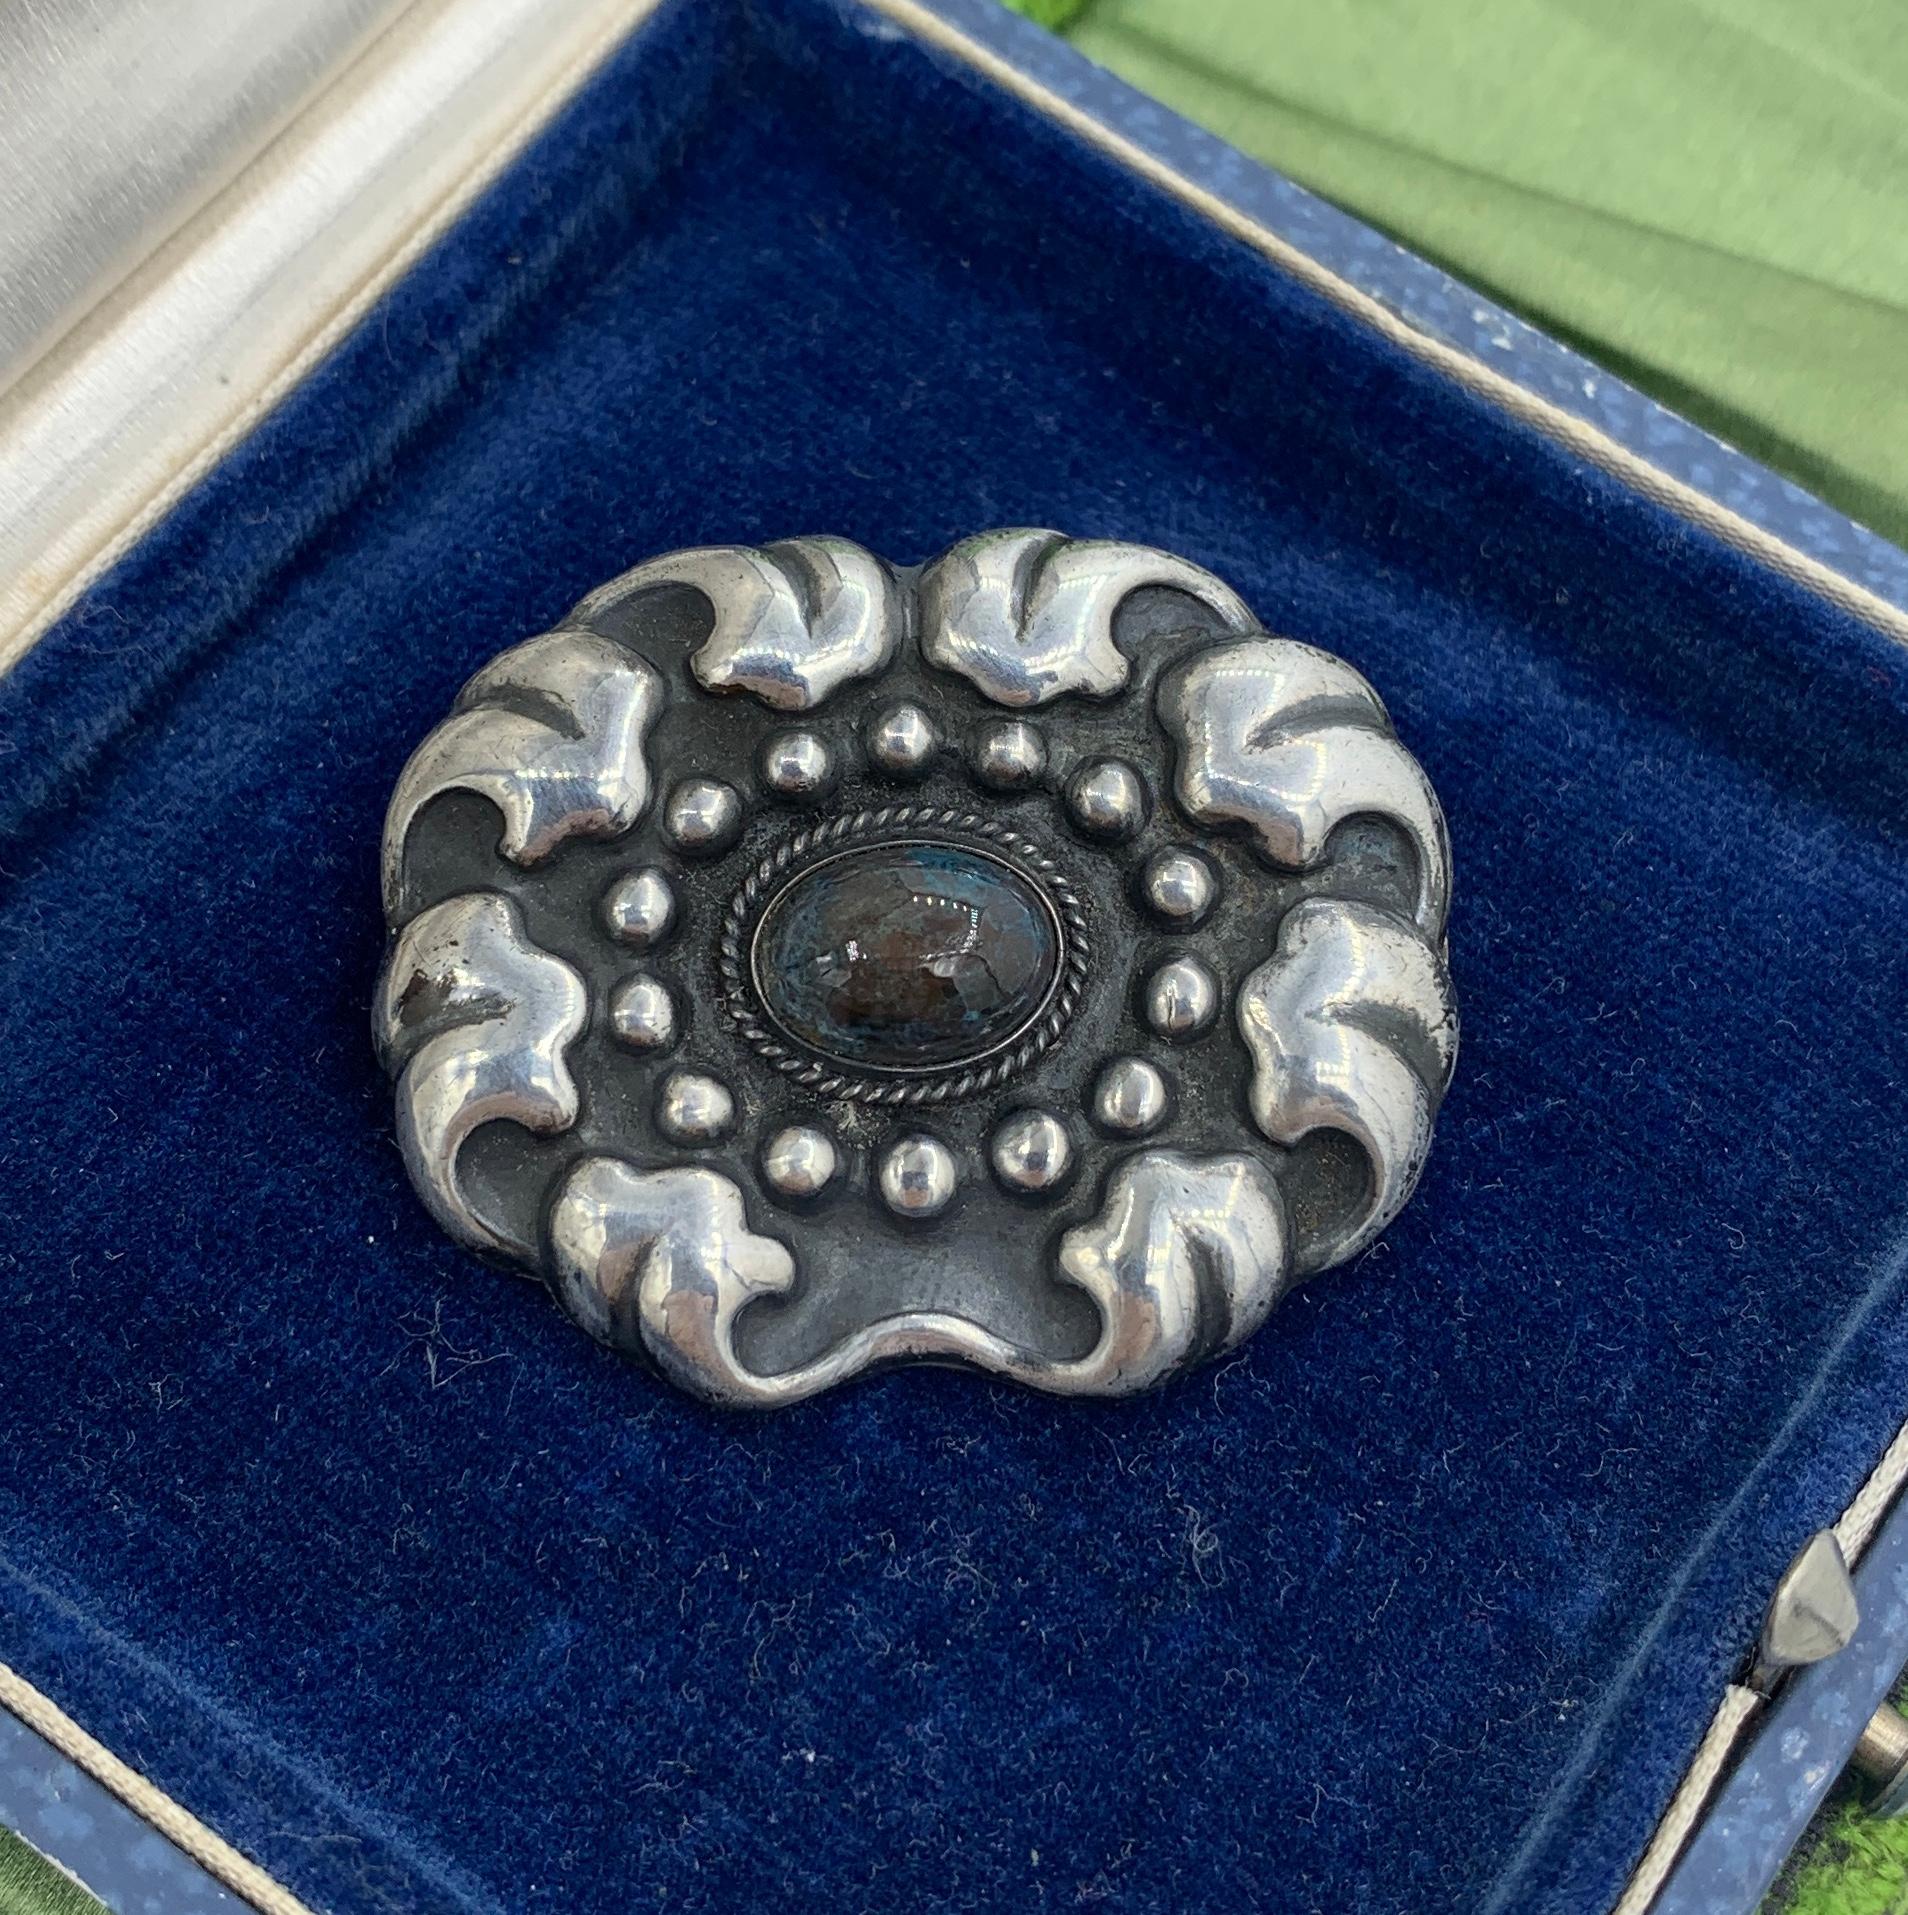 This is the gorgeous early Marius Hammer Art Nouveau silver pin brooch in the form of a flower set with a stunning blue-grey Labradorite gem. The brooch has the mark of Marius Hammer of Norway and 830S for 830 silver.
This pin is a wonderful example